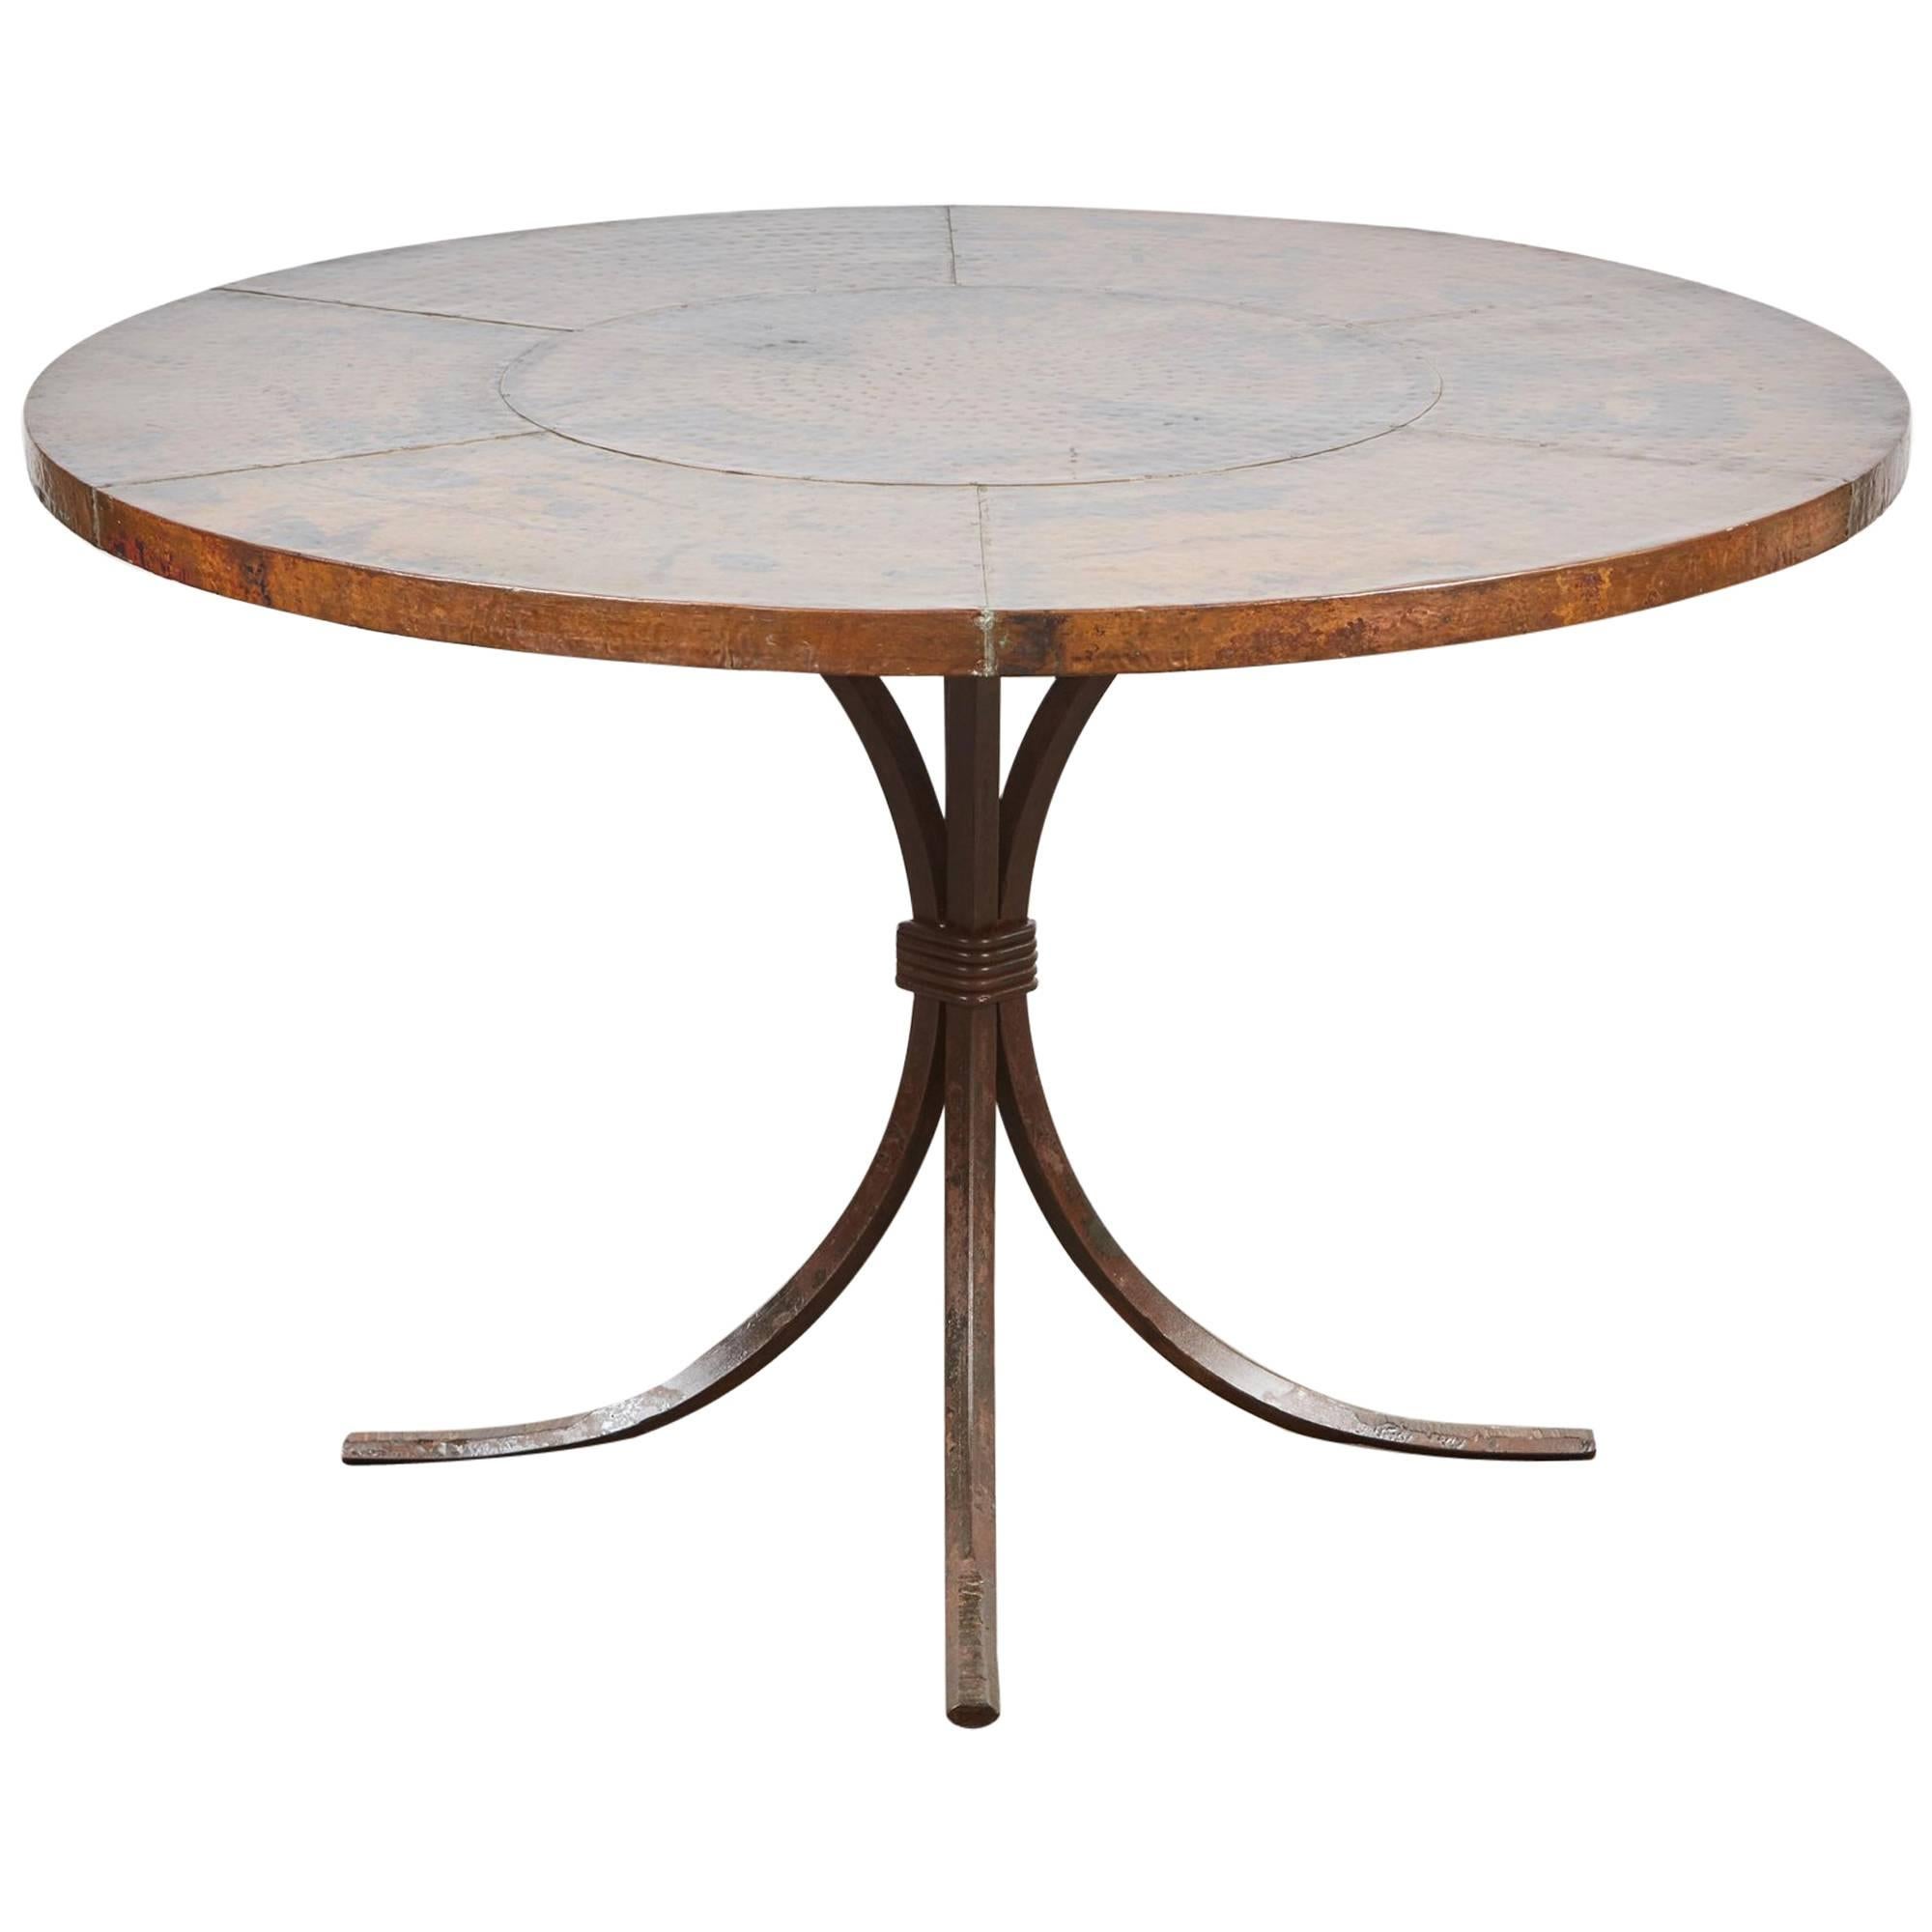 20th Century Indian Copper Top Table with Forged Iron Legs